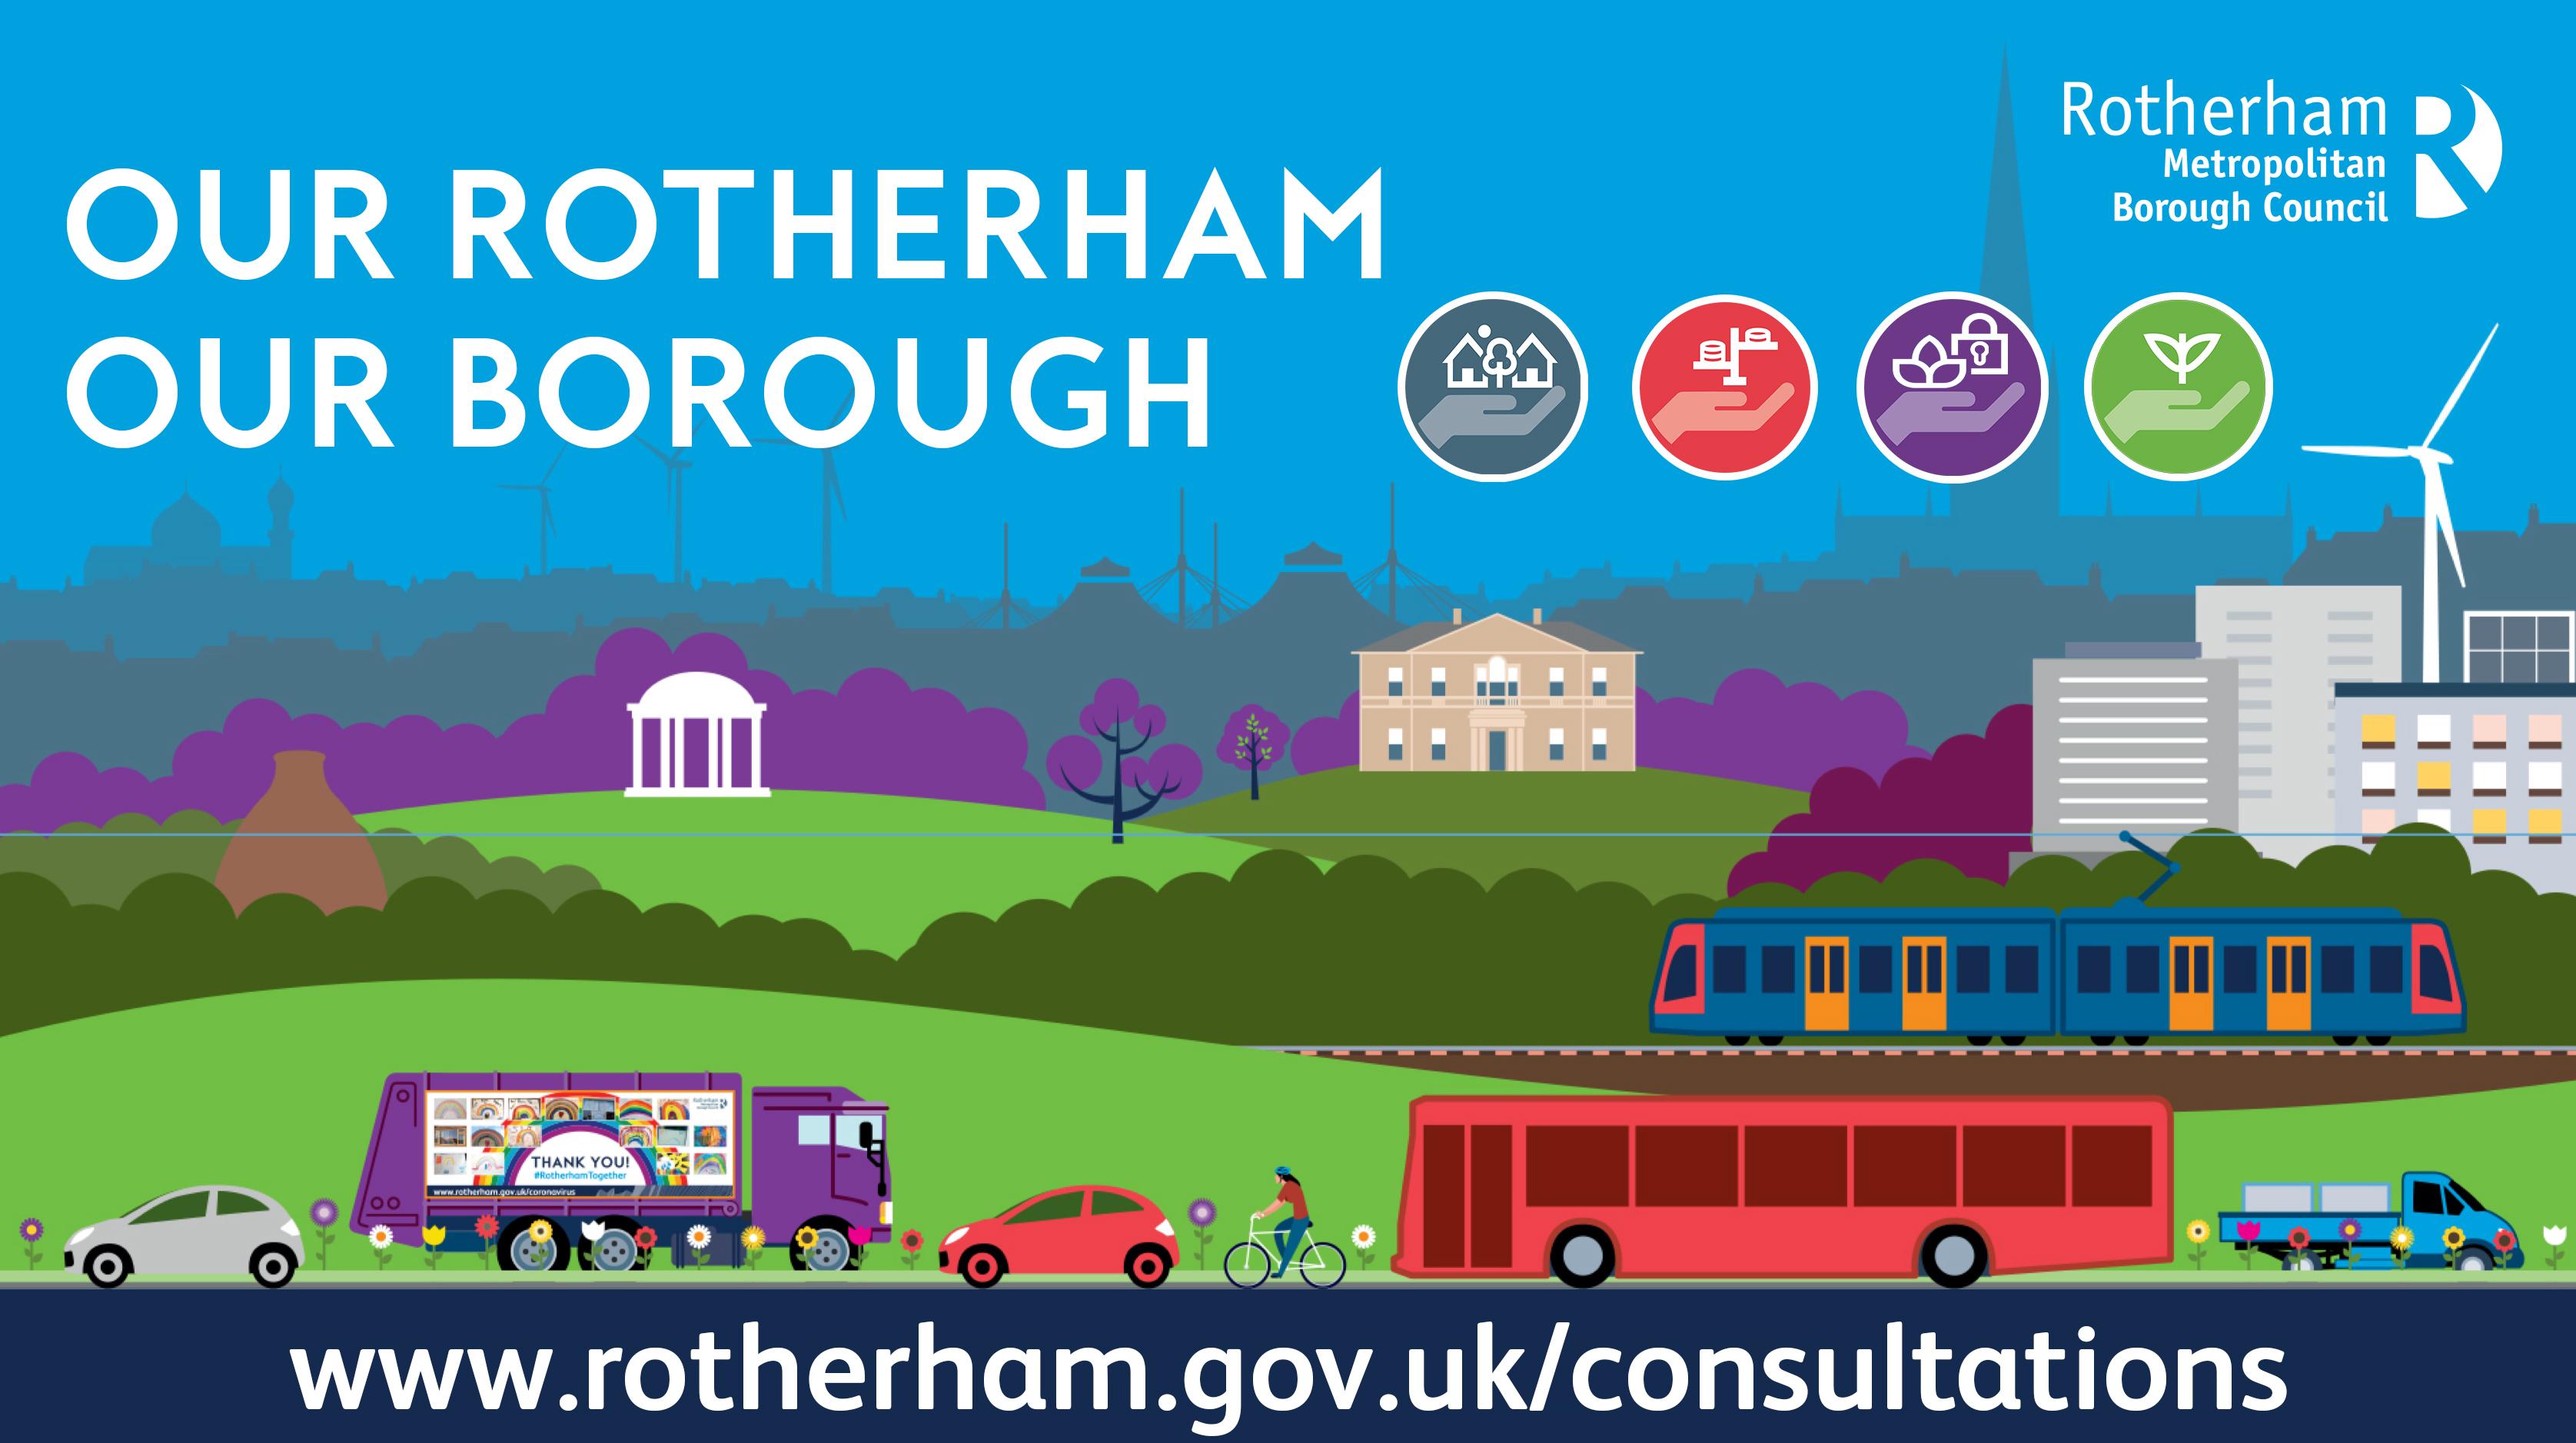 Colourful graphic illustrating the  'Our Rotherham' survey themes